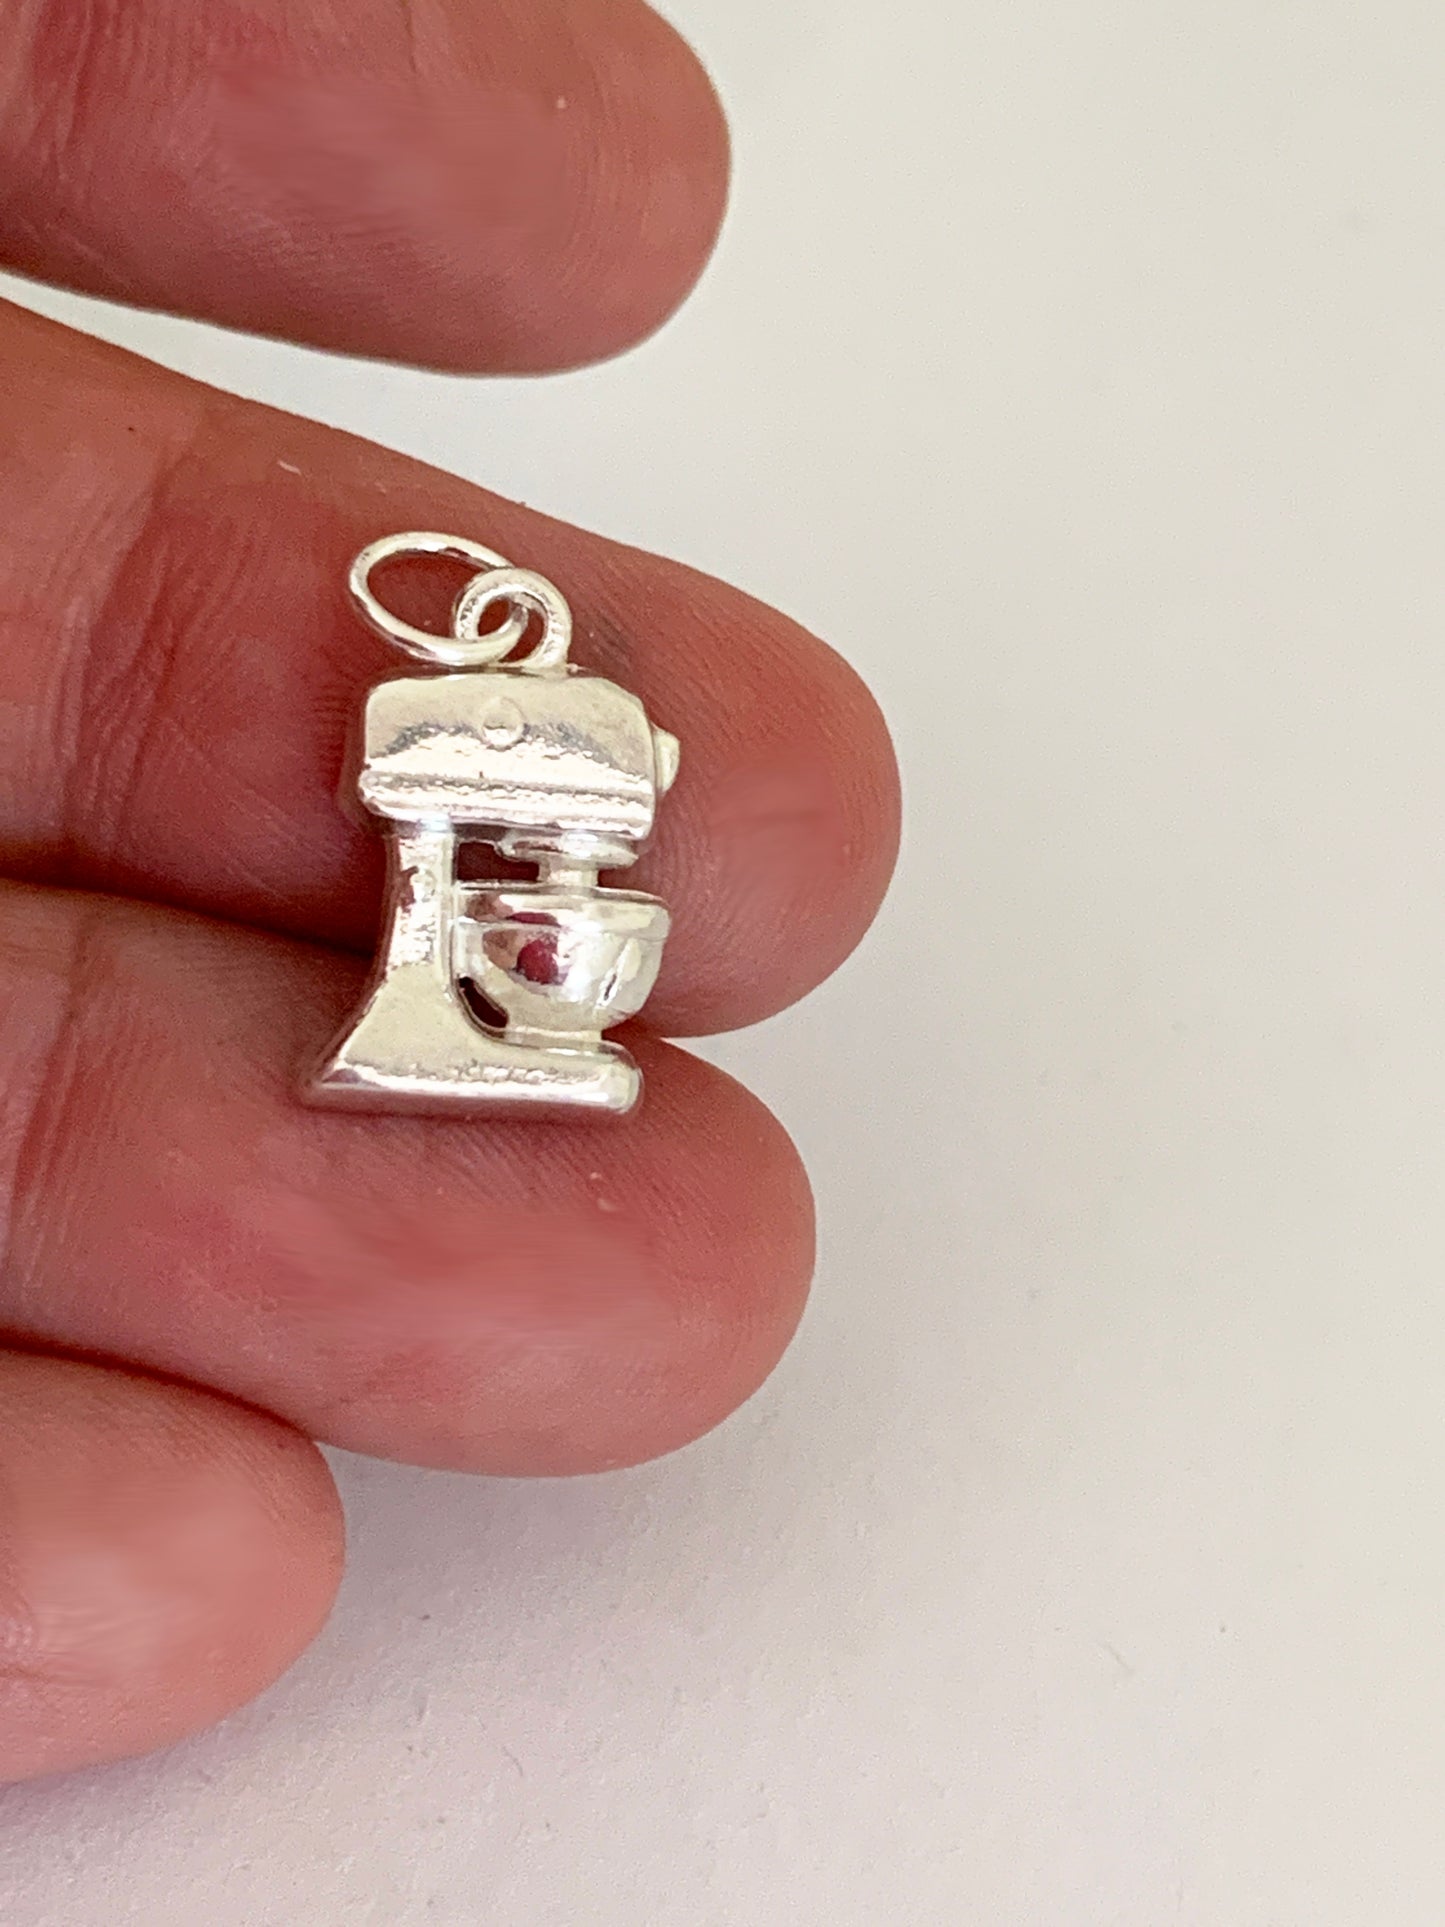 sterling standing mixer charm in hand